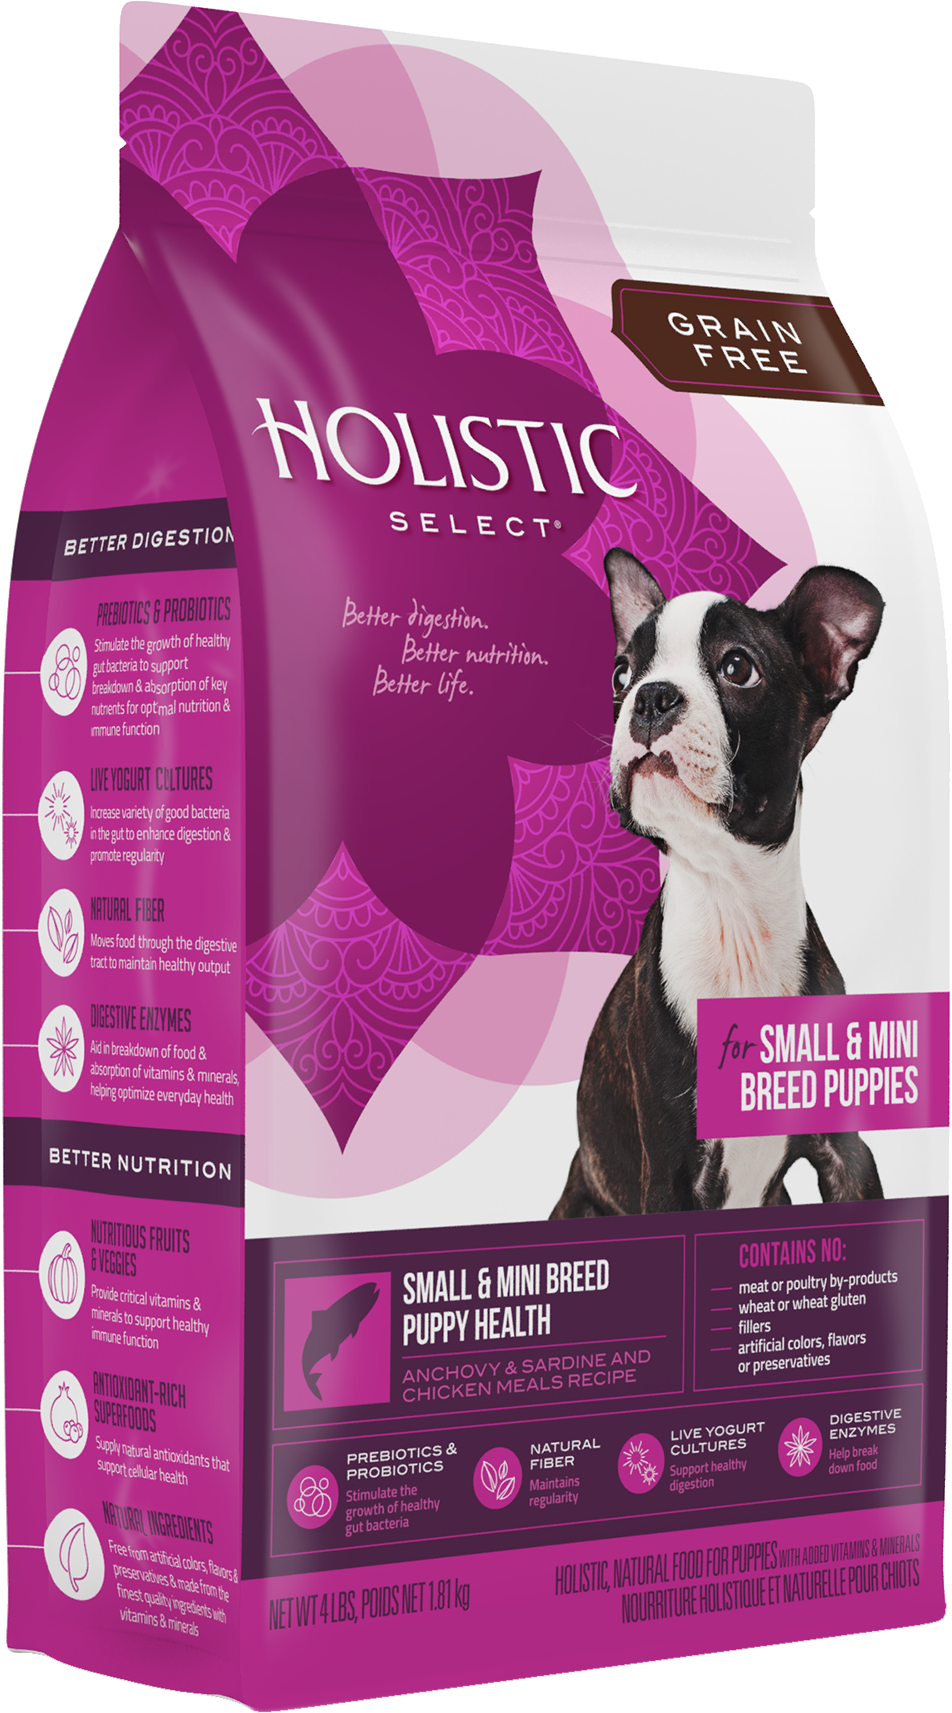 Grain Free Small & Mini Breed Puppy Health product packaging image 1